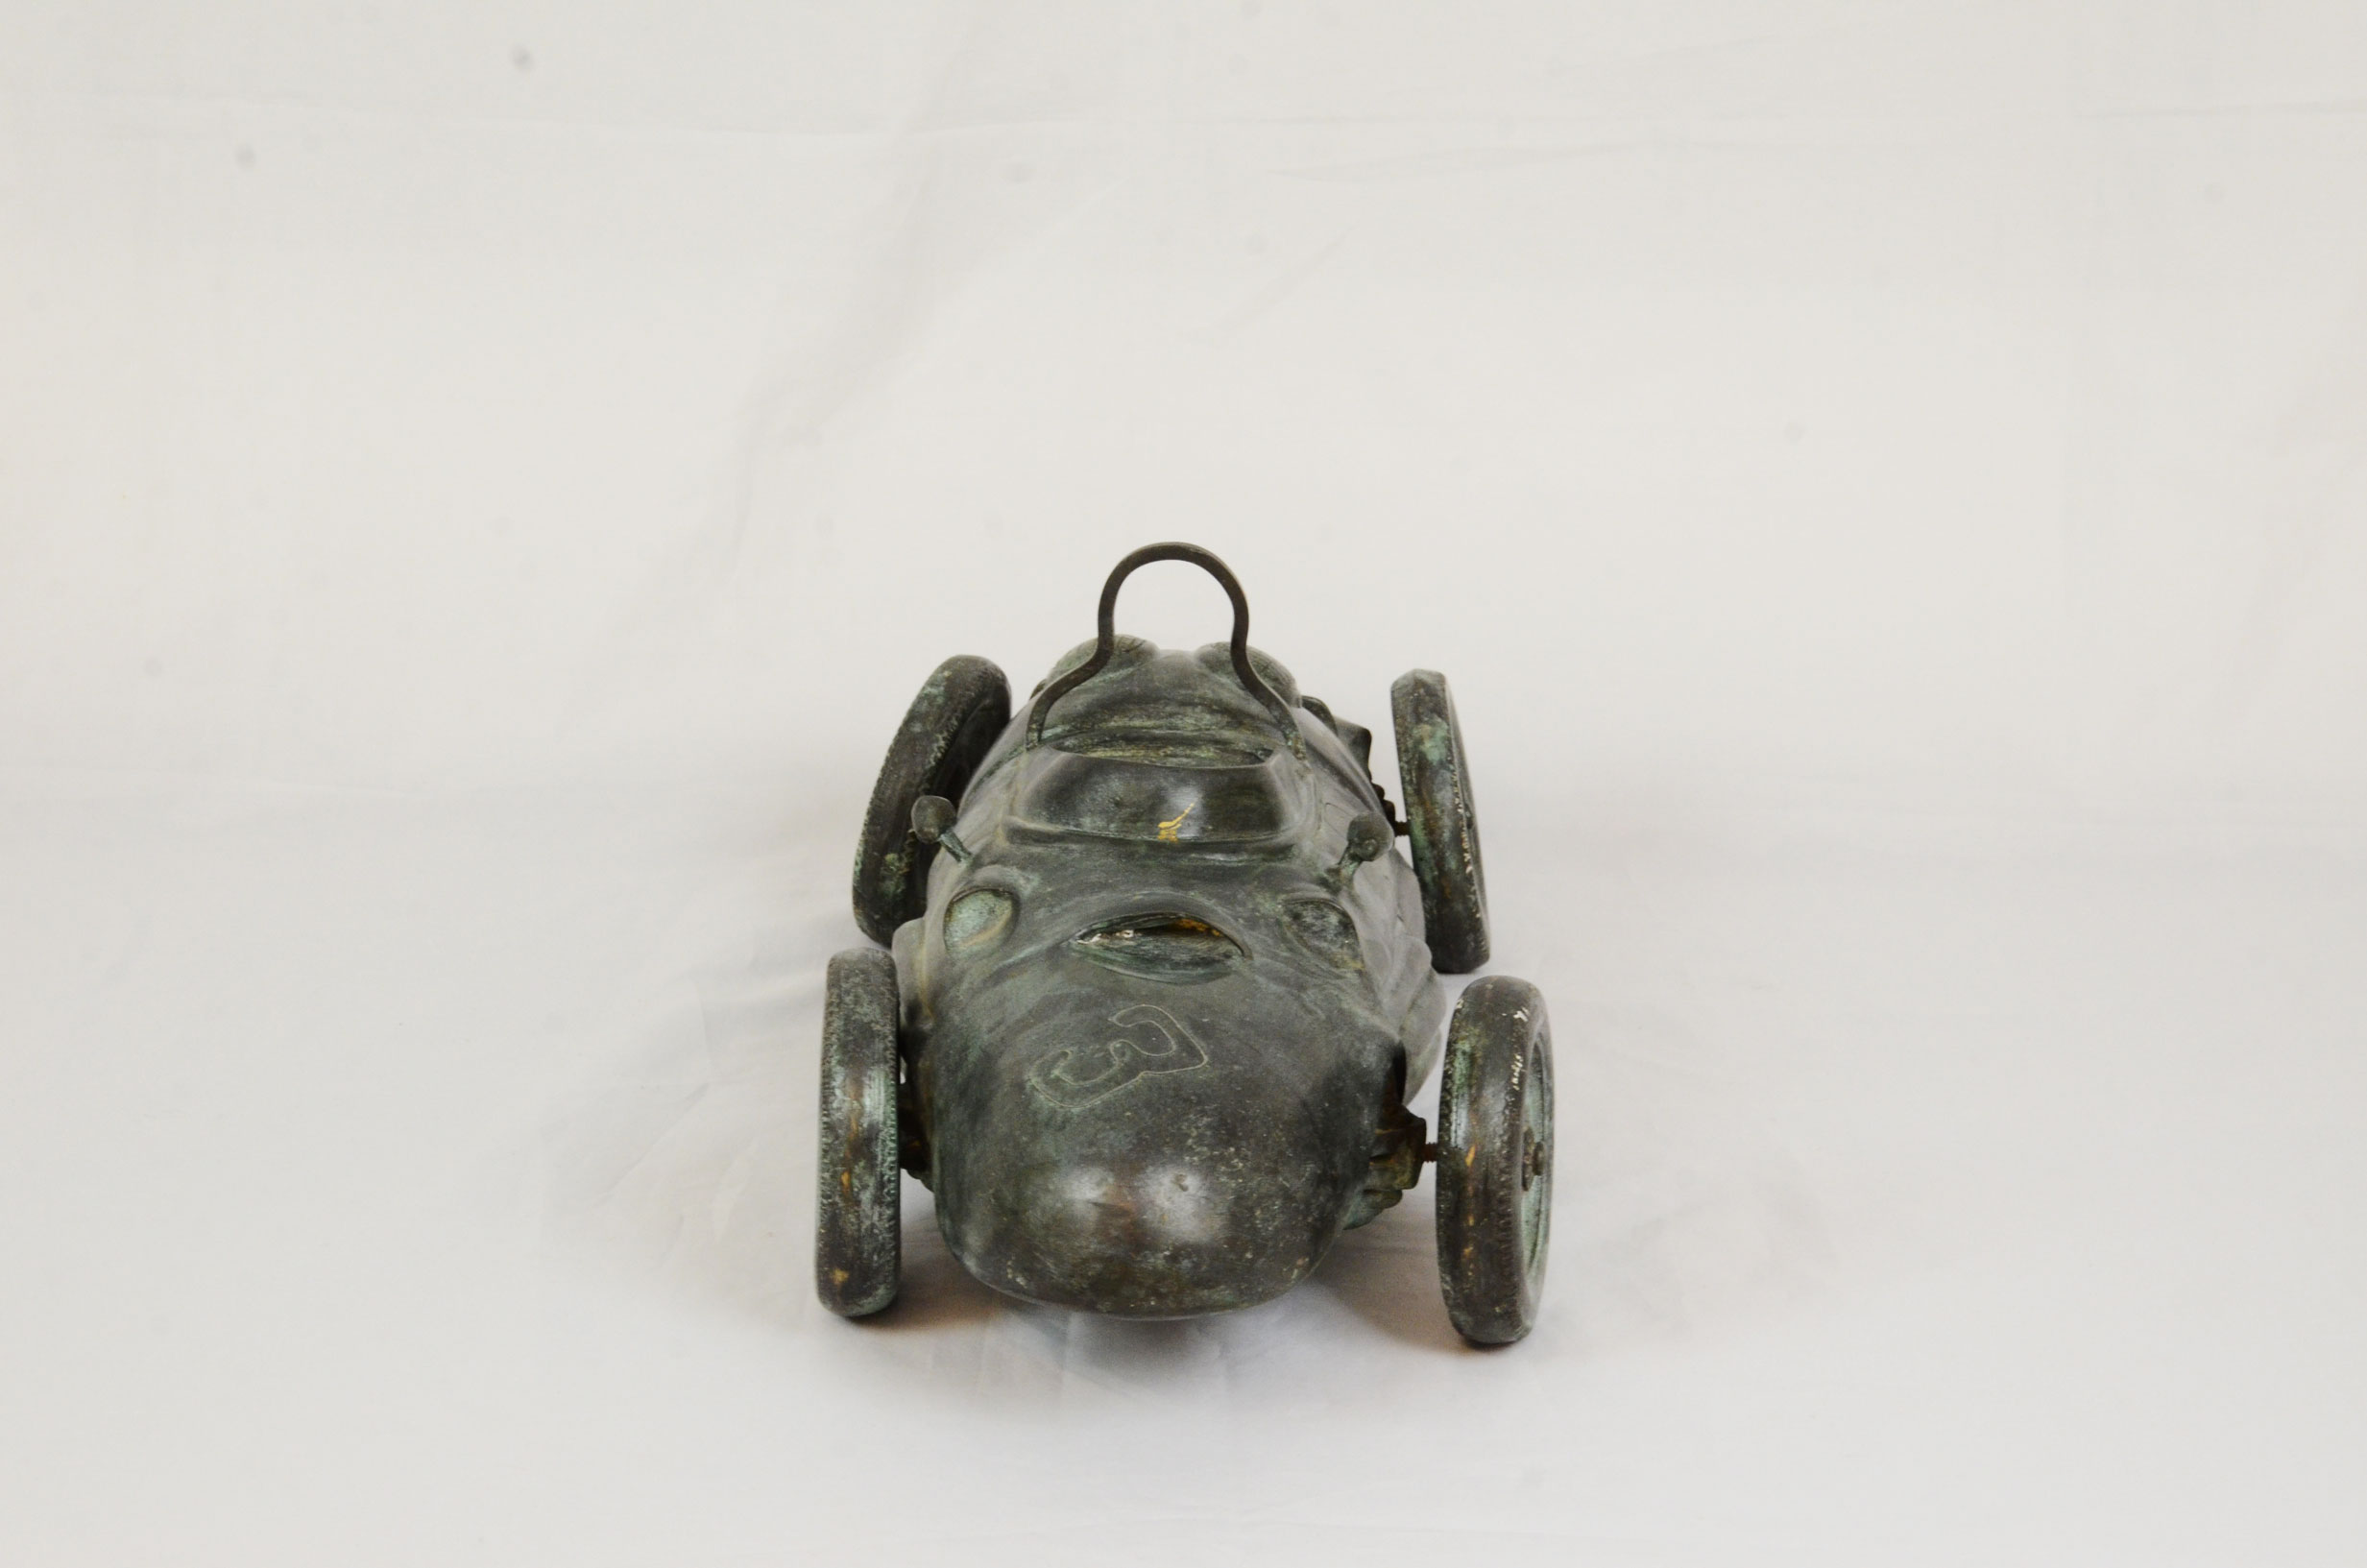 Vintage all brass racing car statue - Image 3 of 5